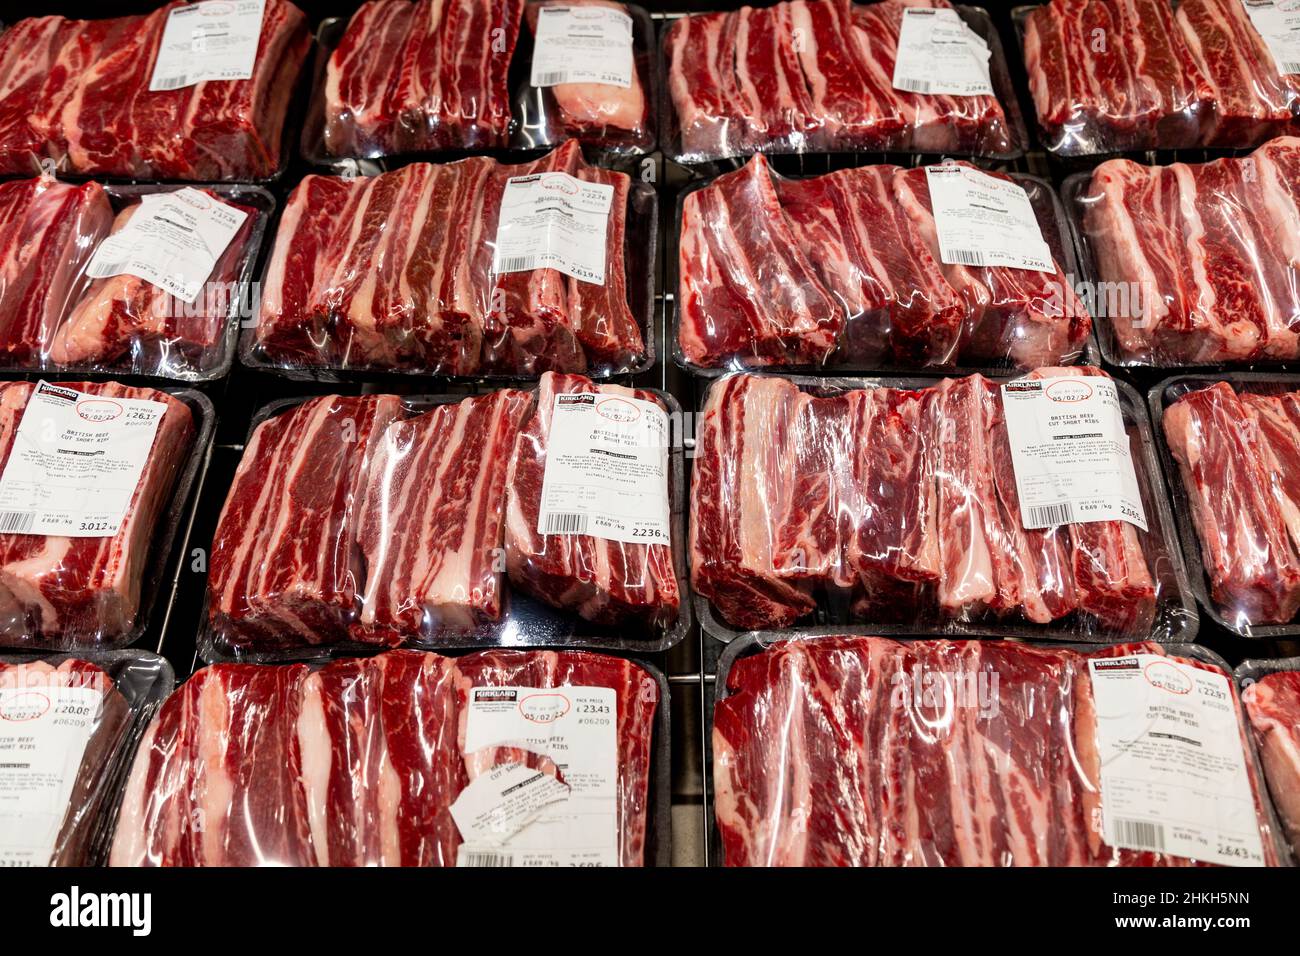 Packets of ribs wrapped in plastic, red meat in a supermarket fridge Stock Photo